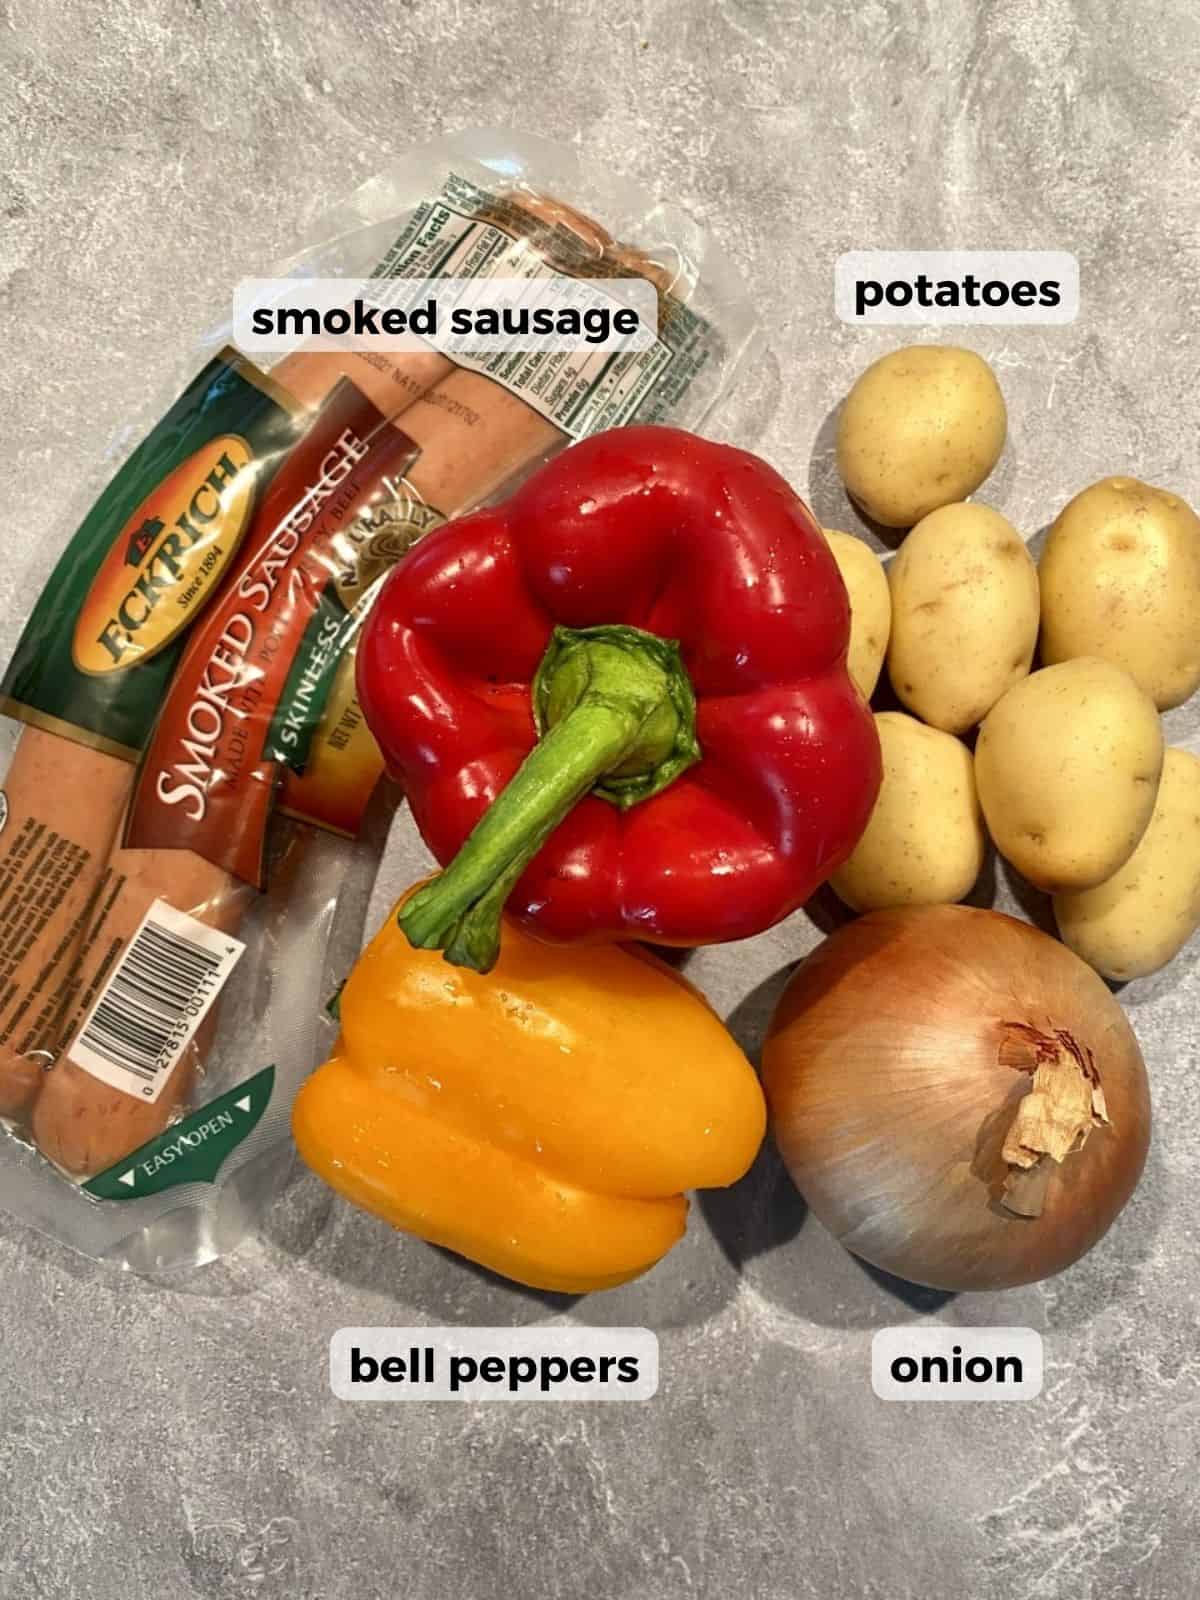 Ingredients needed to make this recipe: smoked sausage, potatoes, peppers, and onions.